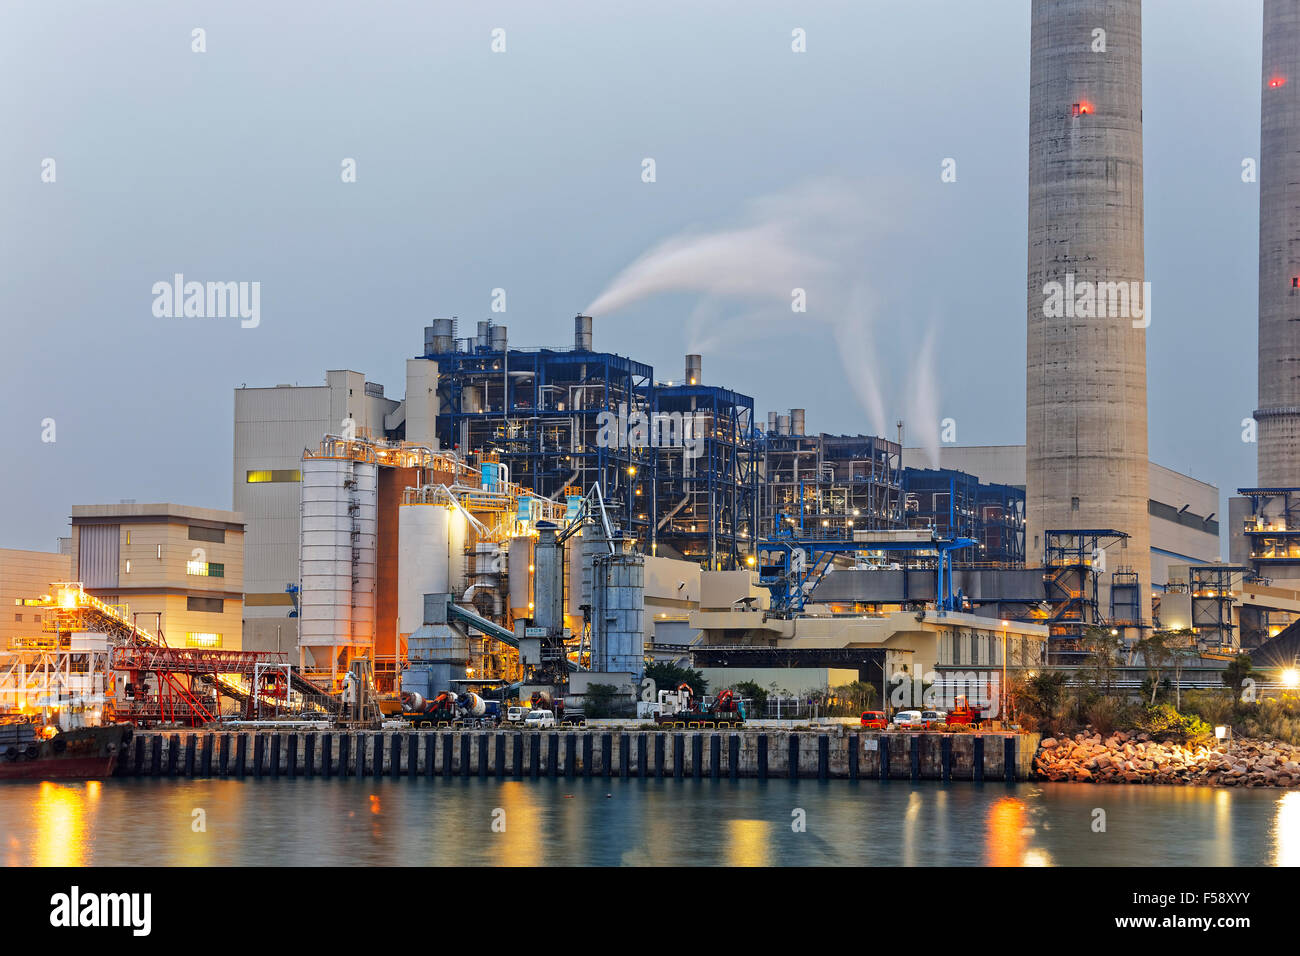 petrochemical industry on sunset, hong kong Stock Photo